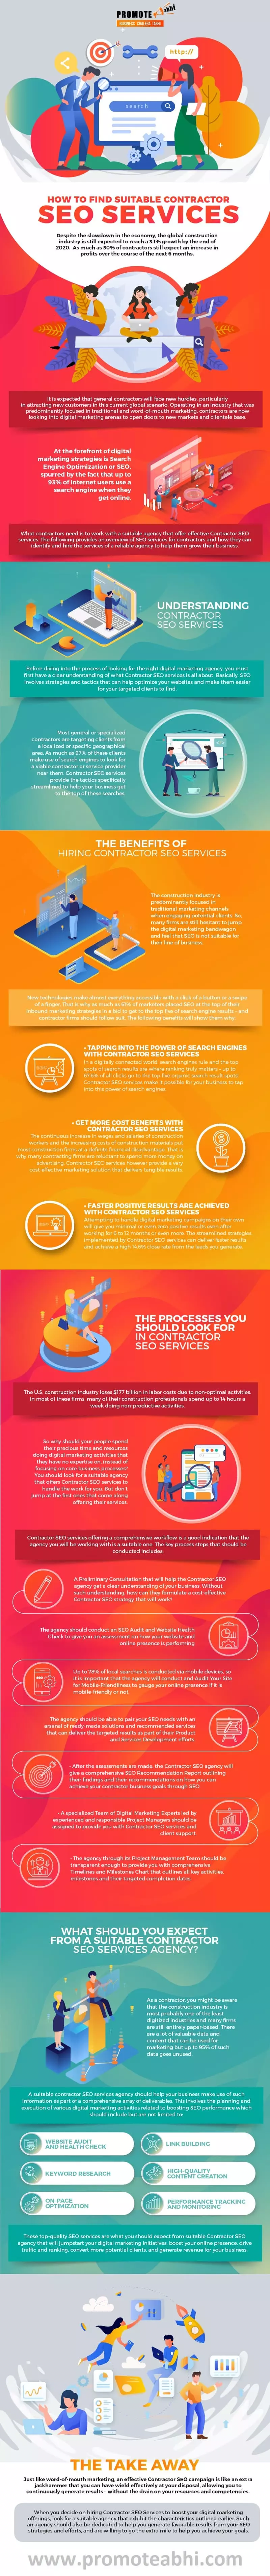 SEO Services Infographic by Promote Abhi